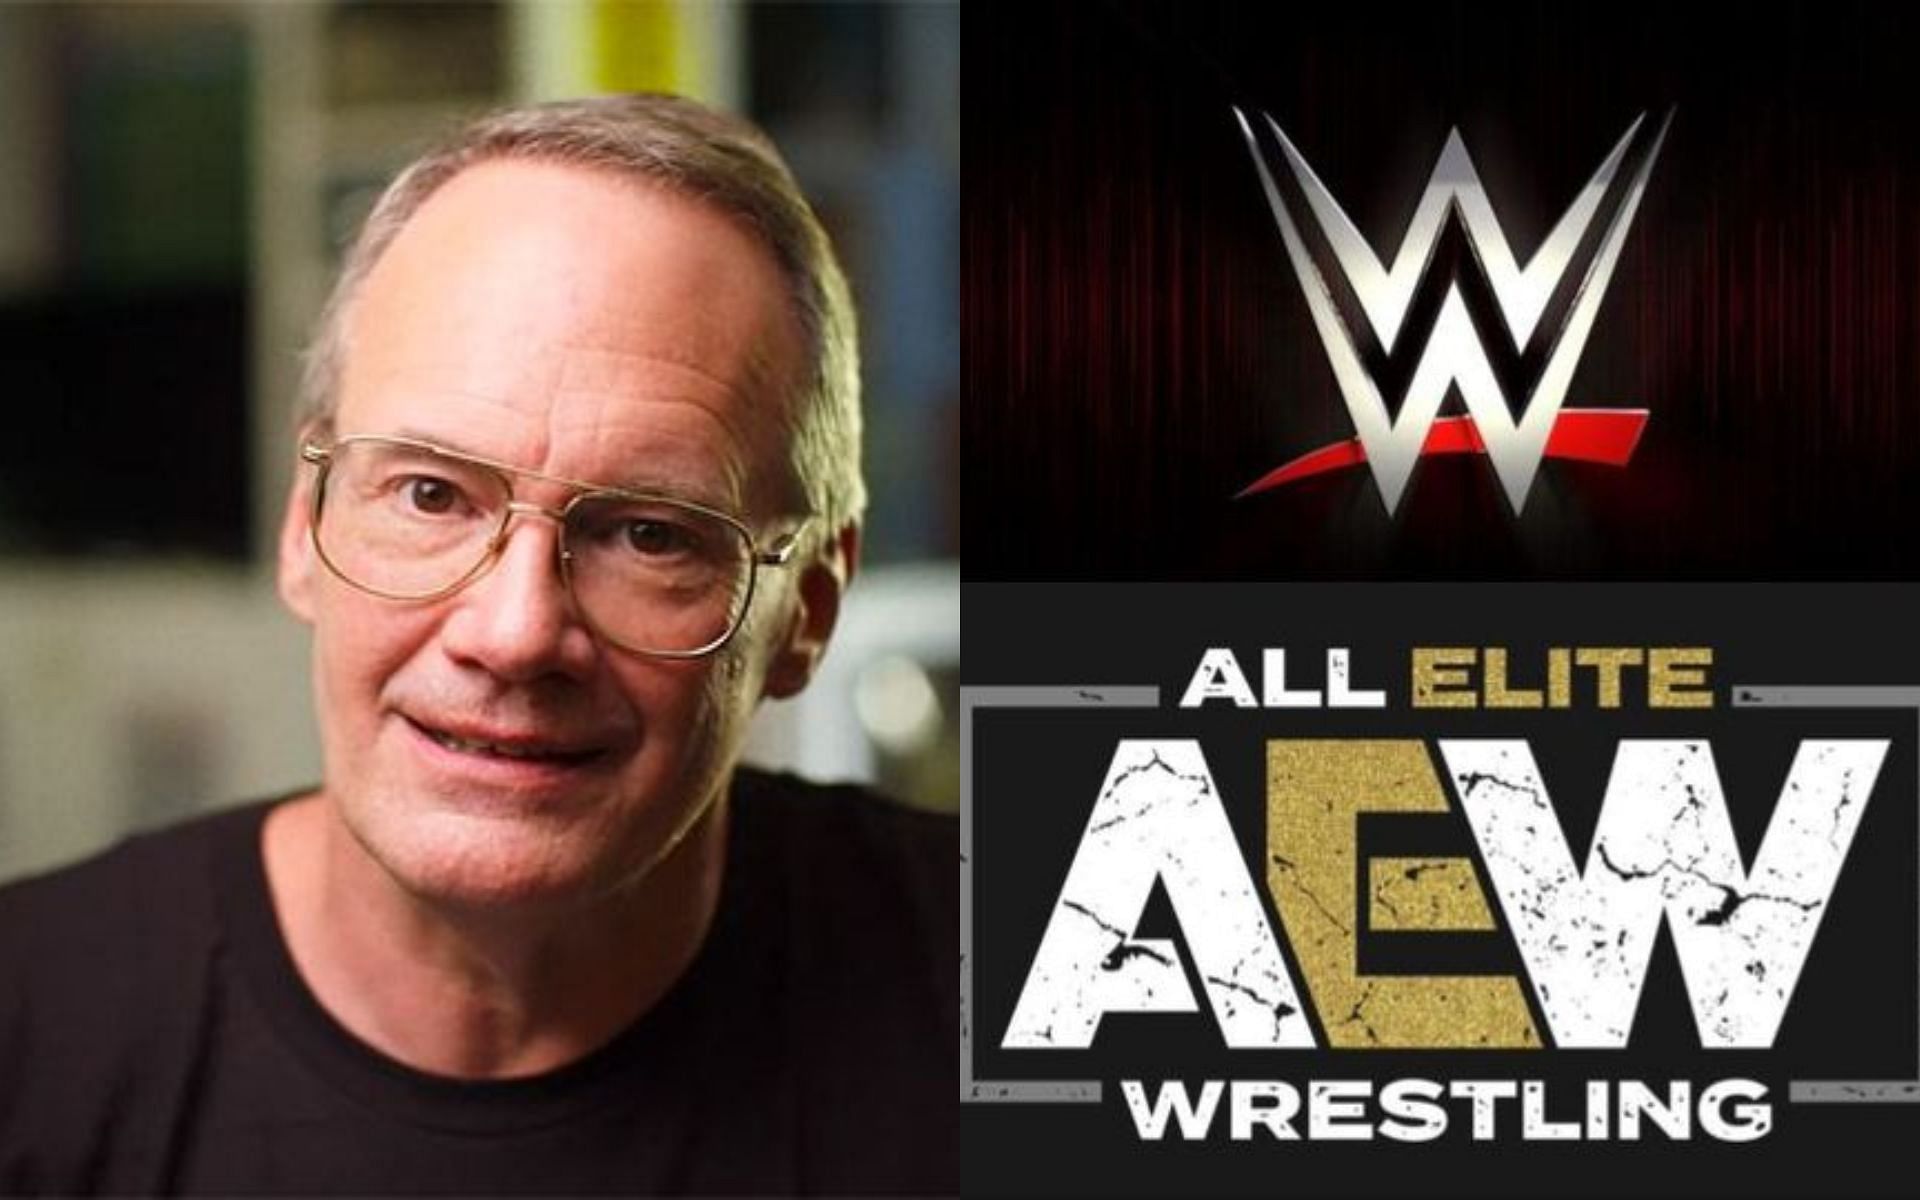 Jim Cornette (left) and AEW and WWE logos (right)